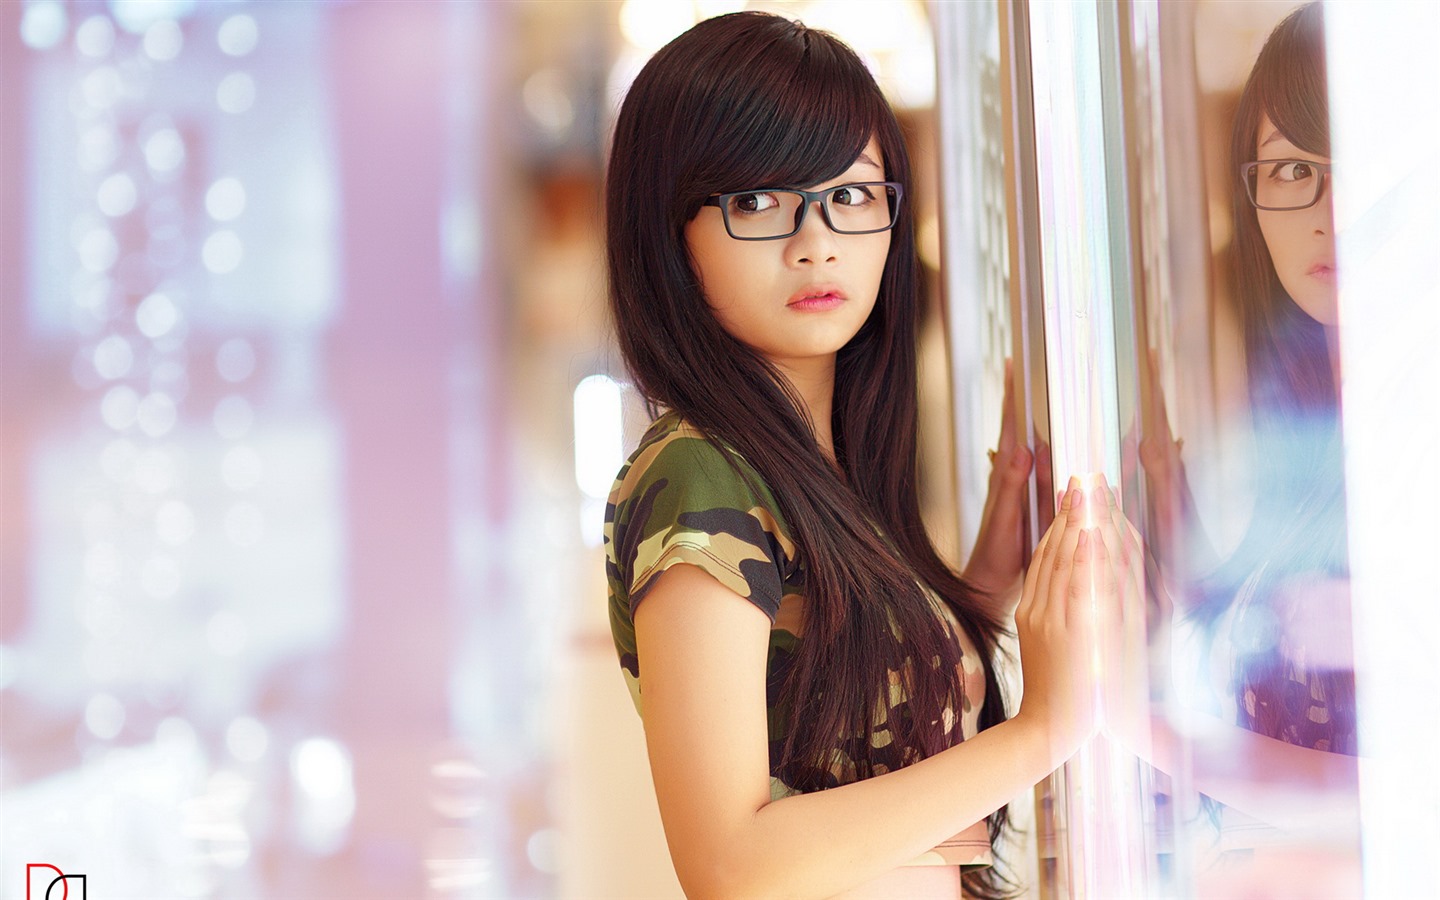 Pure and lovely young Asian girl HD wallpapers collection (3) #36 - 1440x900